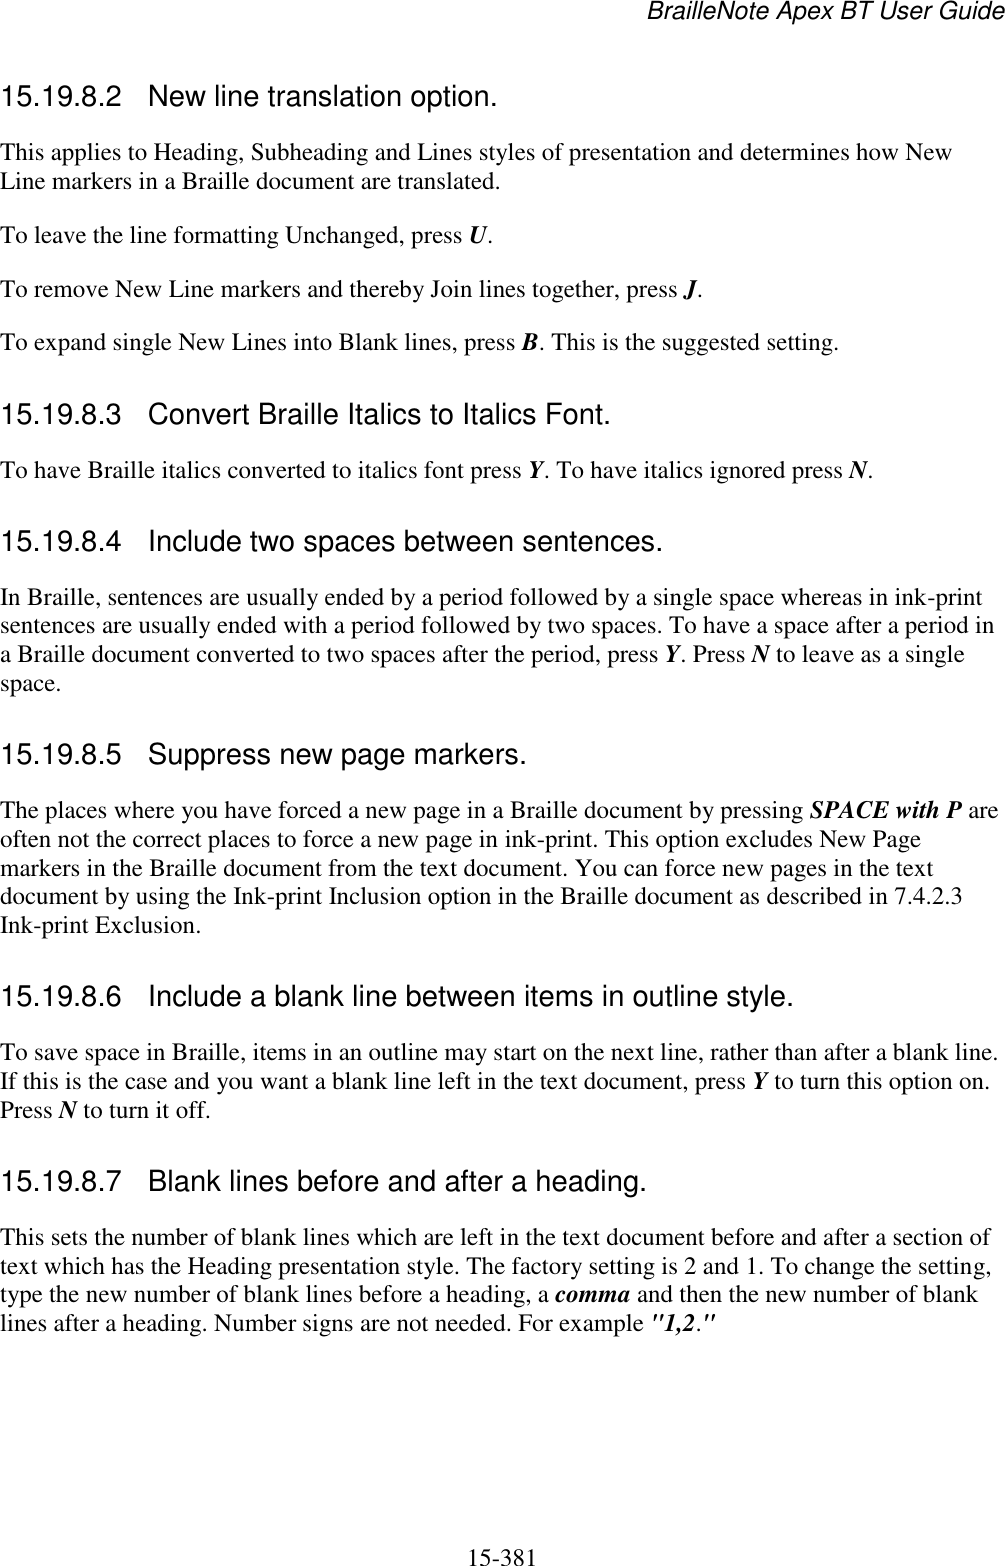 BrailleNote Apex BT User Guide   15-381   15.19.8.2  New line translation option. This applies to Heading, Subheading and Lines styles of presentation and determines how New Line markers in a Braille document are translated. To leave the line formatting Unchanged, press U. To remove New Line markers and thereby Join lines together, press J. To expand single New Lines into Blank lines, press B. This is the suggested setting.  15.19.8.3  Convert Braille Italics to Italics Font. To have Braille italics converted to italics font press Y. To have italics ignored press N.  15.19.8.4  Include two spaces between sentences. In Braille, sentences are usually ended by a period followed by a single space whereas in ink-print sentences are usually ended with a period followed by two spaces. To have a space after a period in a Braille document converted to two spaces after the period, press Y. Press N to leave as a single space.  15.19.8.5  Suppress new page markers. The places where you have forced a new page in a Braille document by pressing SPACE with P are often not the correct places to force a new page in ink-print. This option excludes New Page markers in the Braille document from the text document. You can force new pages in the text document by using the Ink-print Inclusion option in the Braille document as described in 7.4.2.3 Ink-print Exclusion.  15.19.8.6  Include a blank line between items in outline style. To save space in Braille, items in an outline may start on the next line, rather than after a blank line. If this is the case and you want a blank line left in the text document, press Y to turn this option on. Press N to turn it off.  15.19.8.7  Blank lines before and after a heading. This sets the number of blank lines which are left in the text document before and after a section of text which has the Heading presentation style. The factory setting is 2 and 1. To change the setting, type the new number of blank lines before a heading, a comma and then the new number of blank lines after a heading. Number signs are not needed. For example &quot;1,2.&quot;  